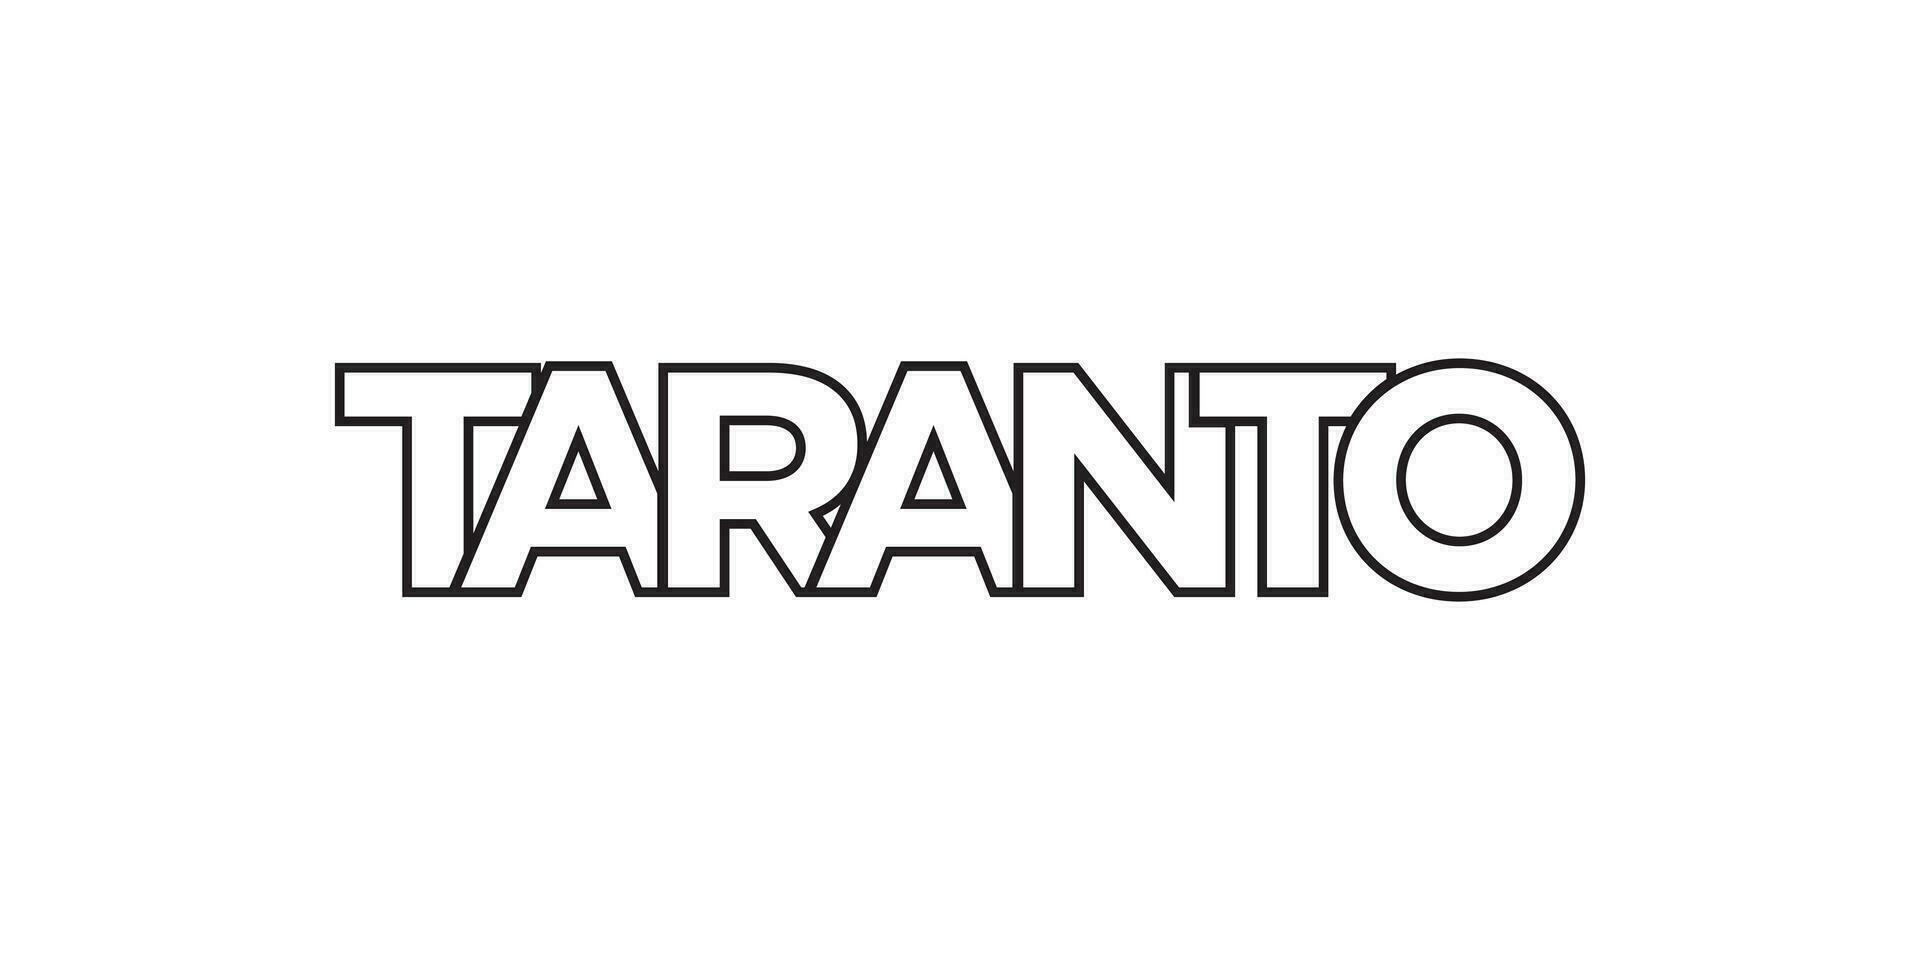 Taranto in the Italia emblem. The design features a geometric style, vector illustration with bold typography in a modern font. The graphic slogan lettering.